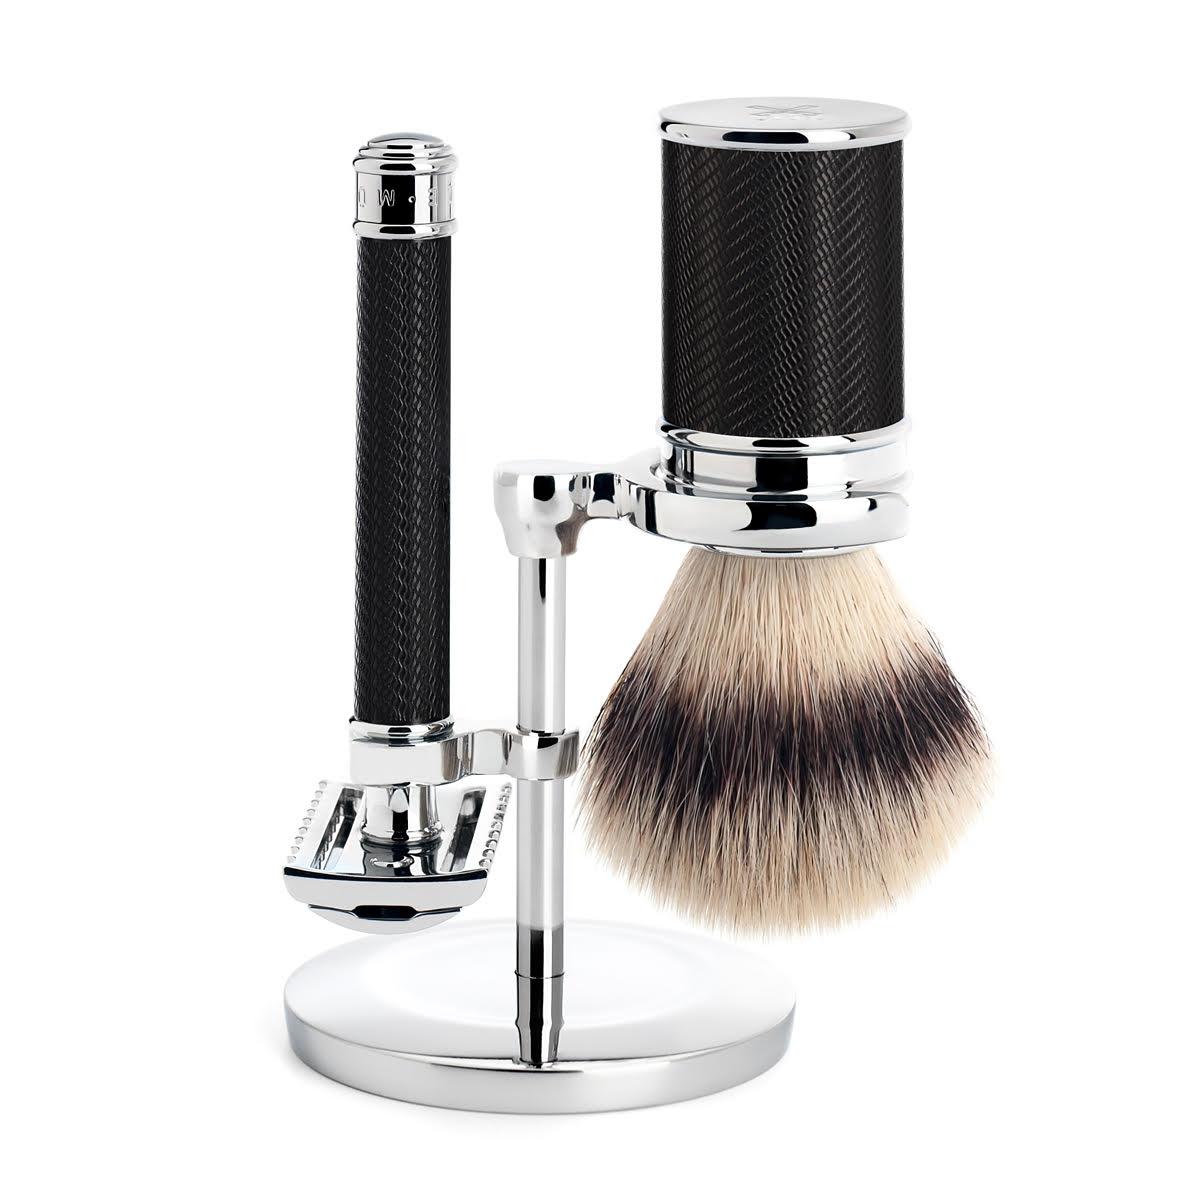 MÜHLE Silvertip Fibre (Synthetic) and Open Comb Safety Razor Shaving Set